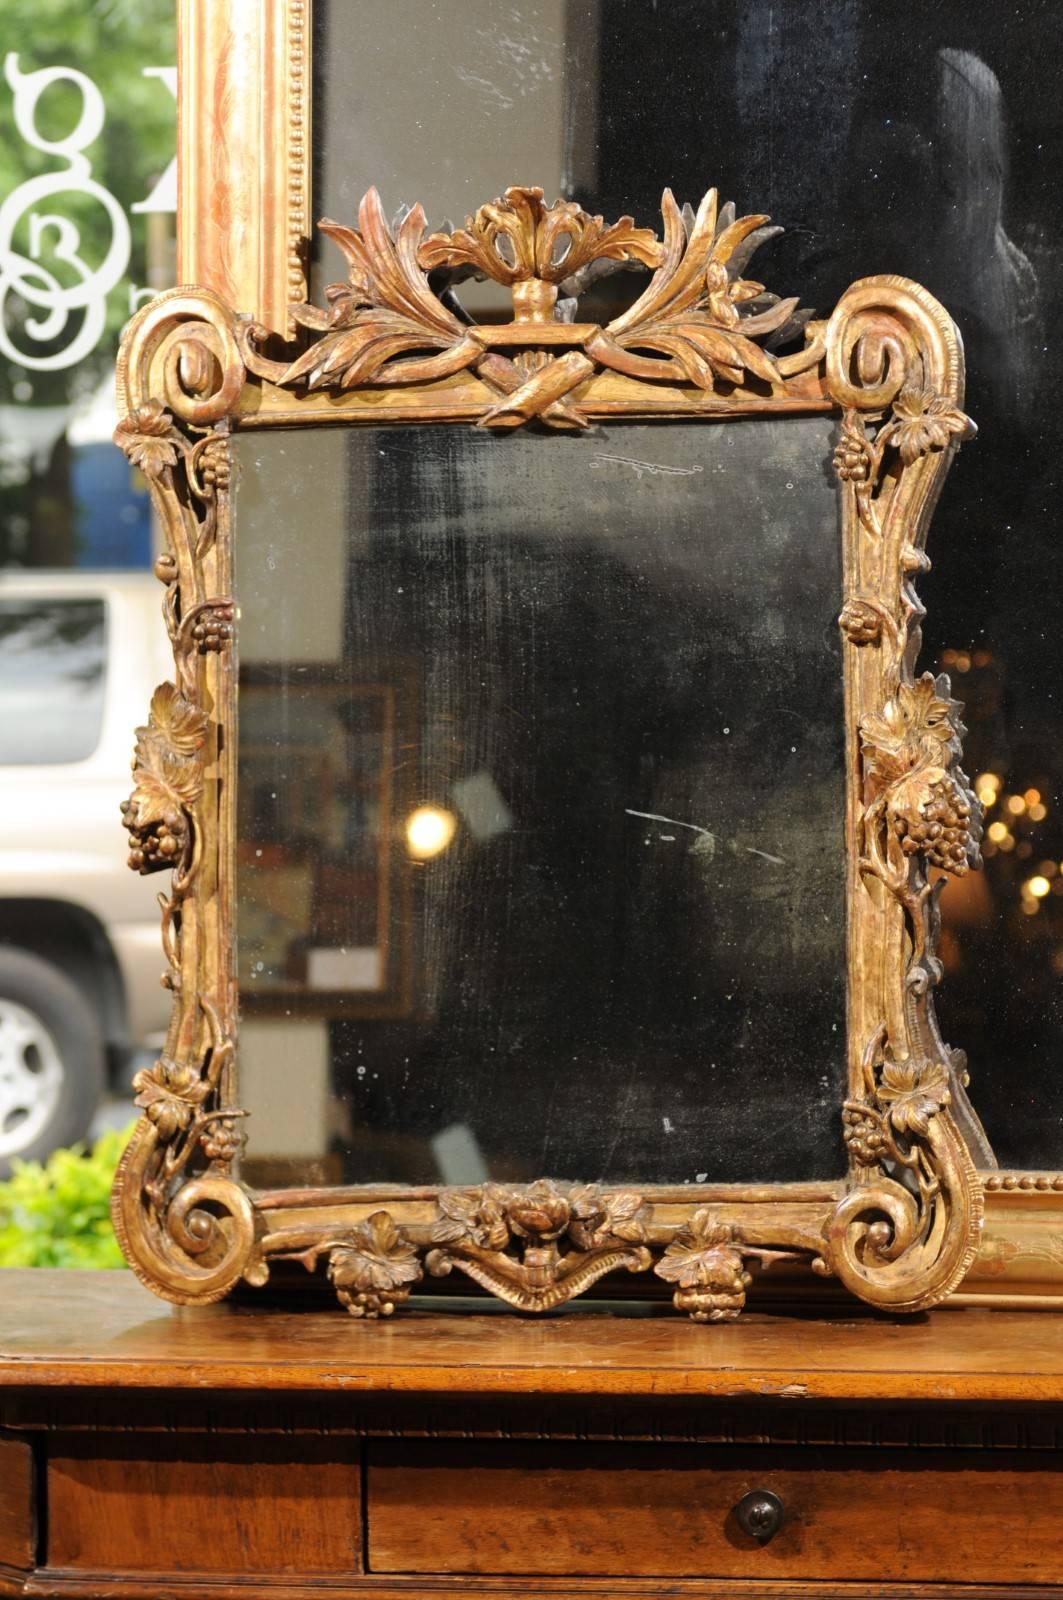 A French Baroque style giltwood mirror, carved with grapes, vines and volutes from the 19th century. This French medium size wall mirror features an exquisite Baroque style frame, adorned with delicate volutes accentuating each of the four corners,